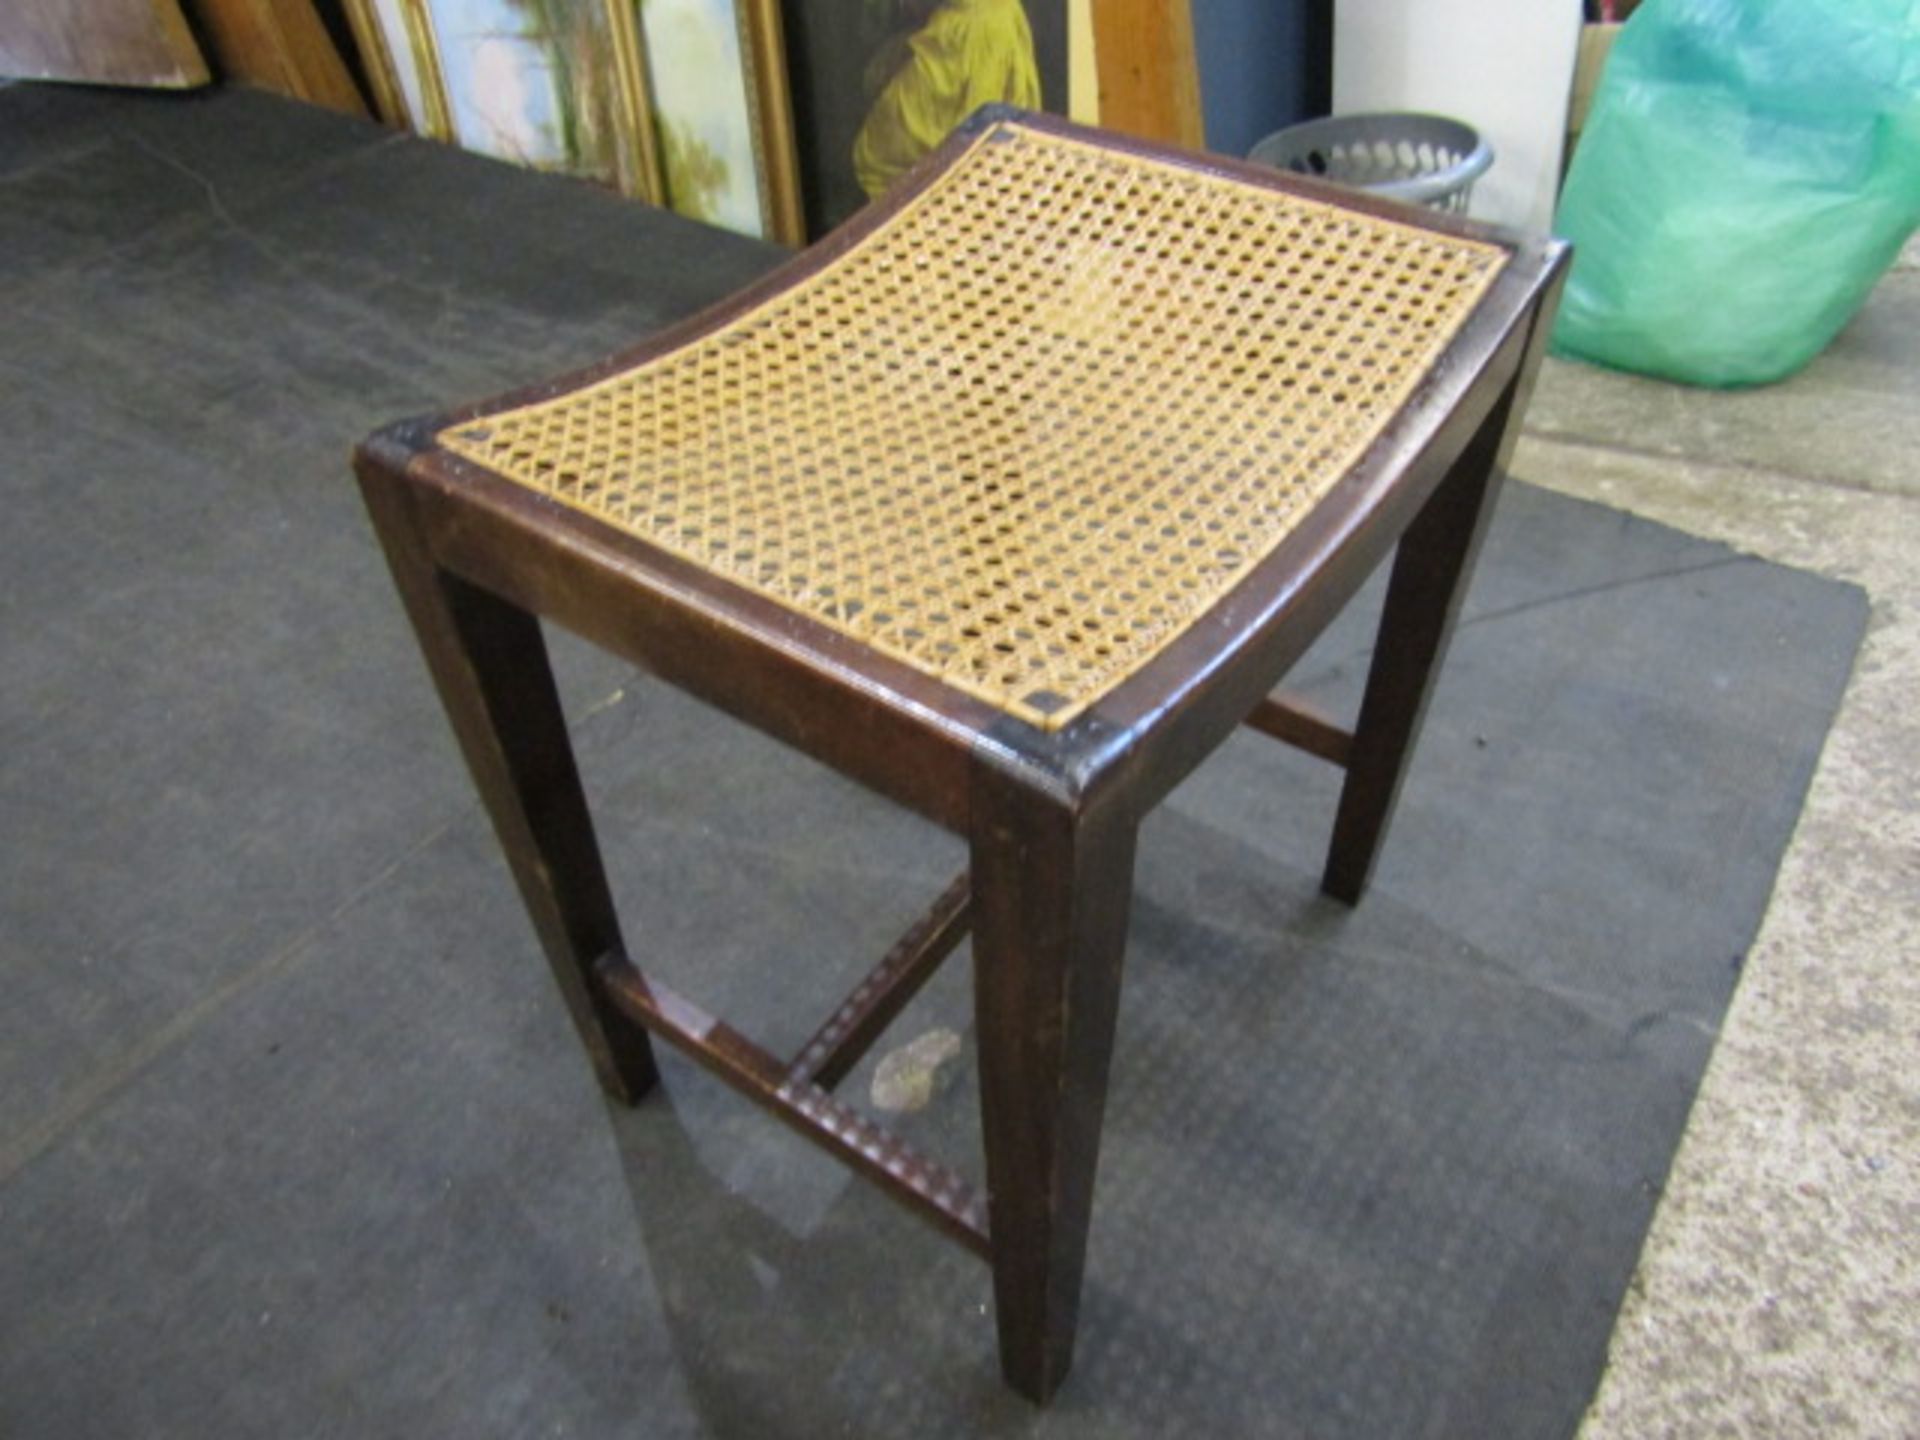 a cane seat stool - Image 2 of 3